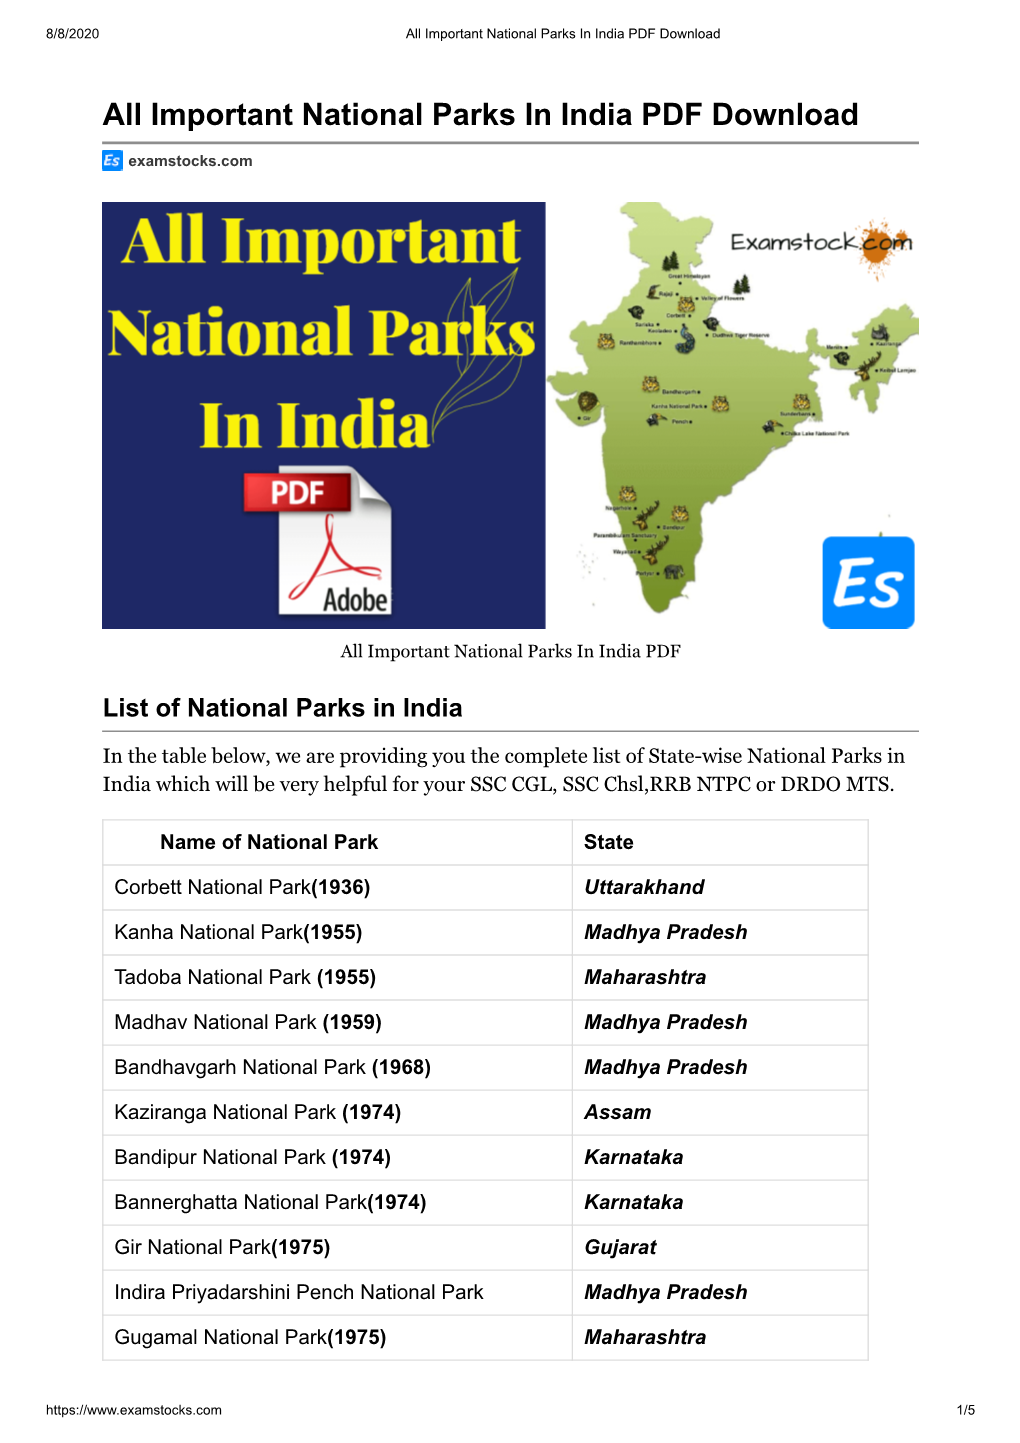 All Important National Parks in India PDF Download